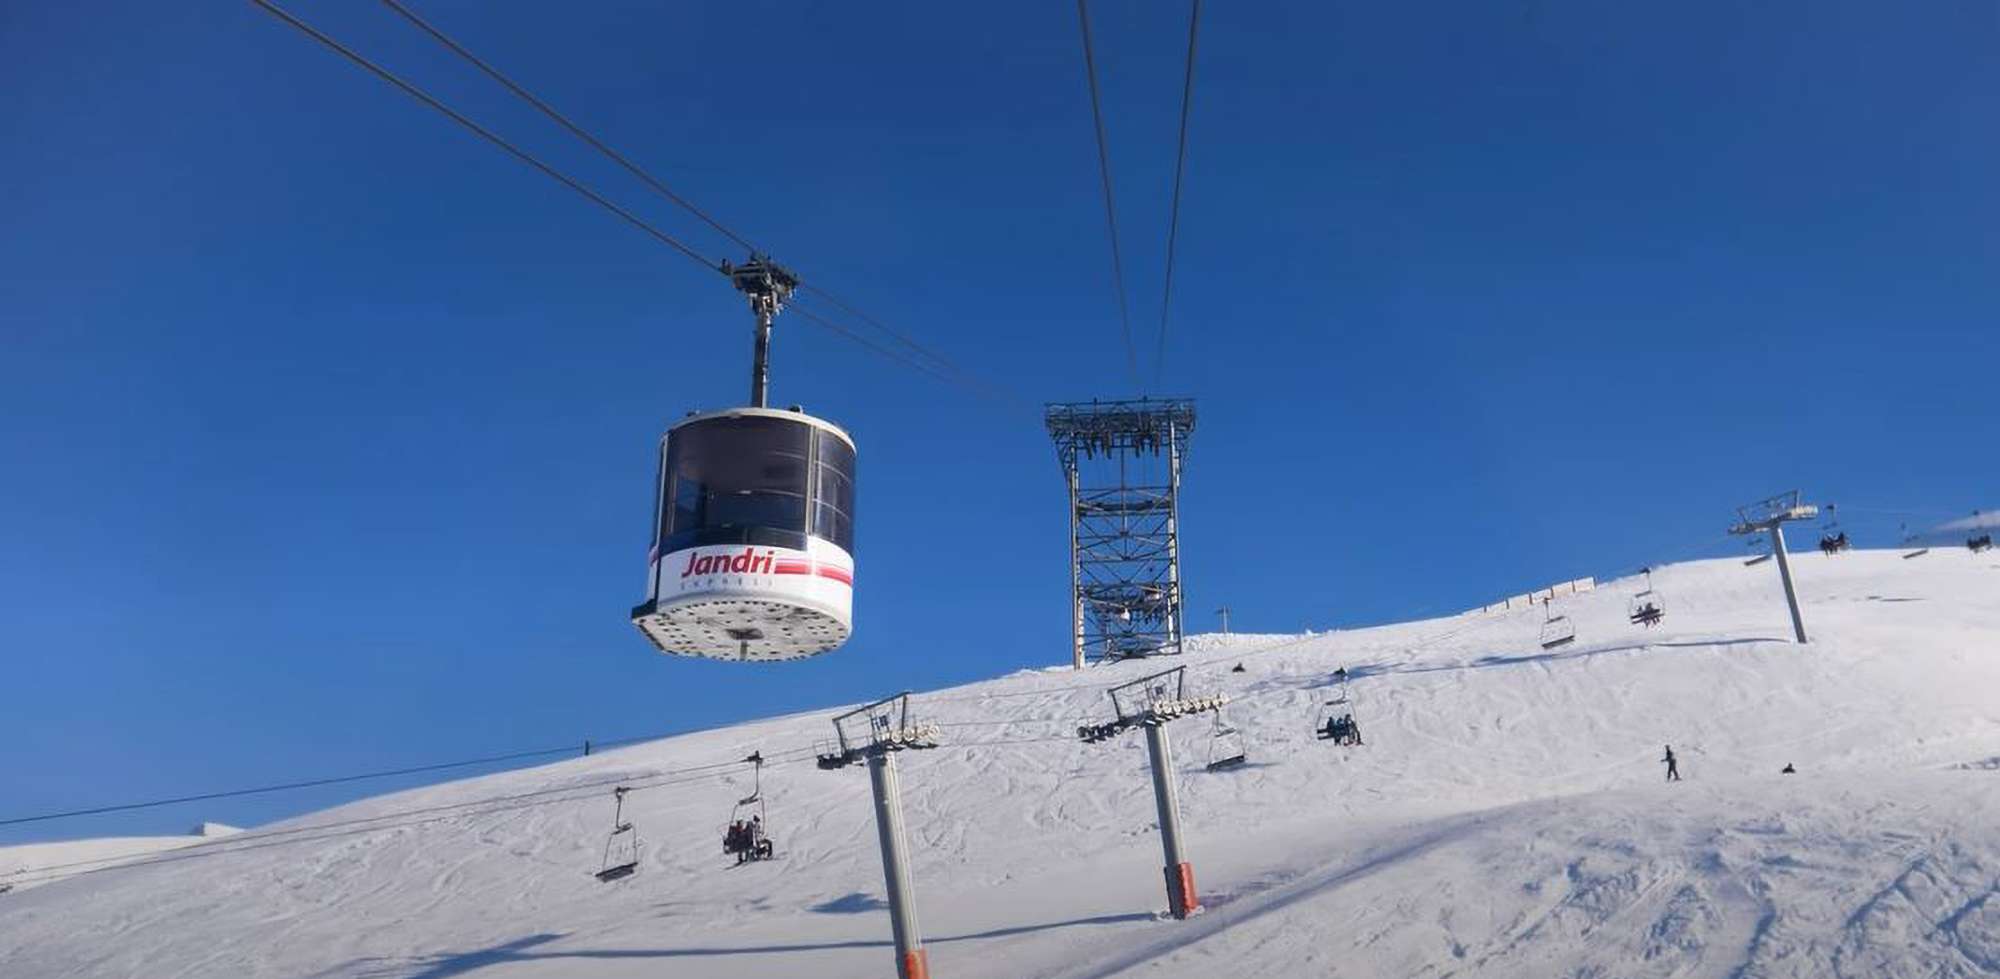 Read more about the article Drunken French Skier Impaled On Pole In Front Of Friend After Plunging From Gondola